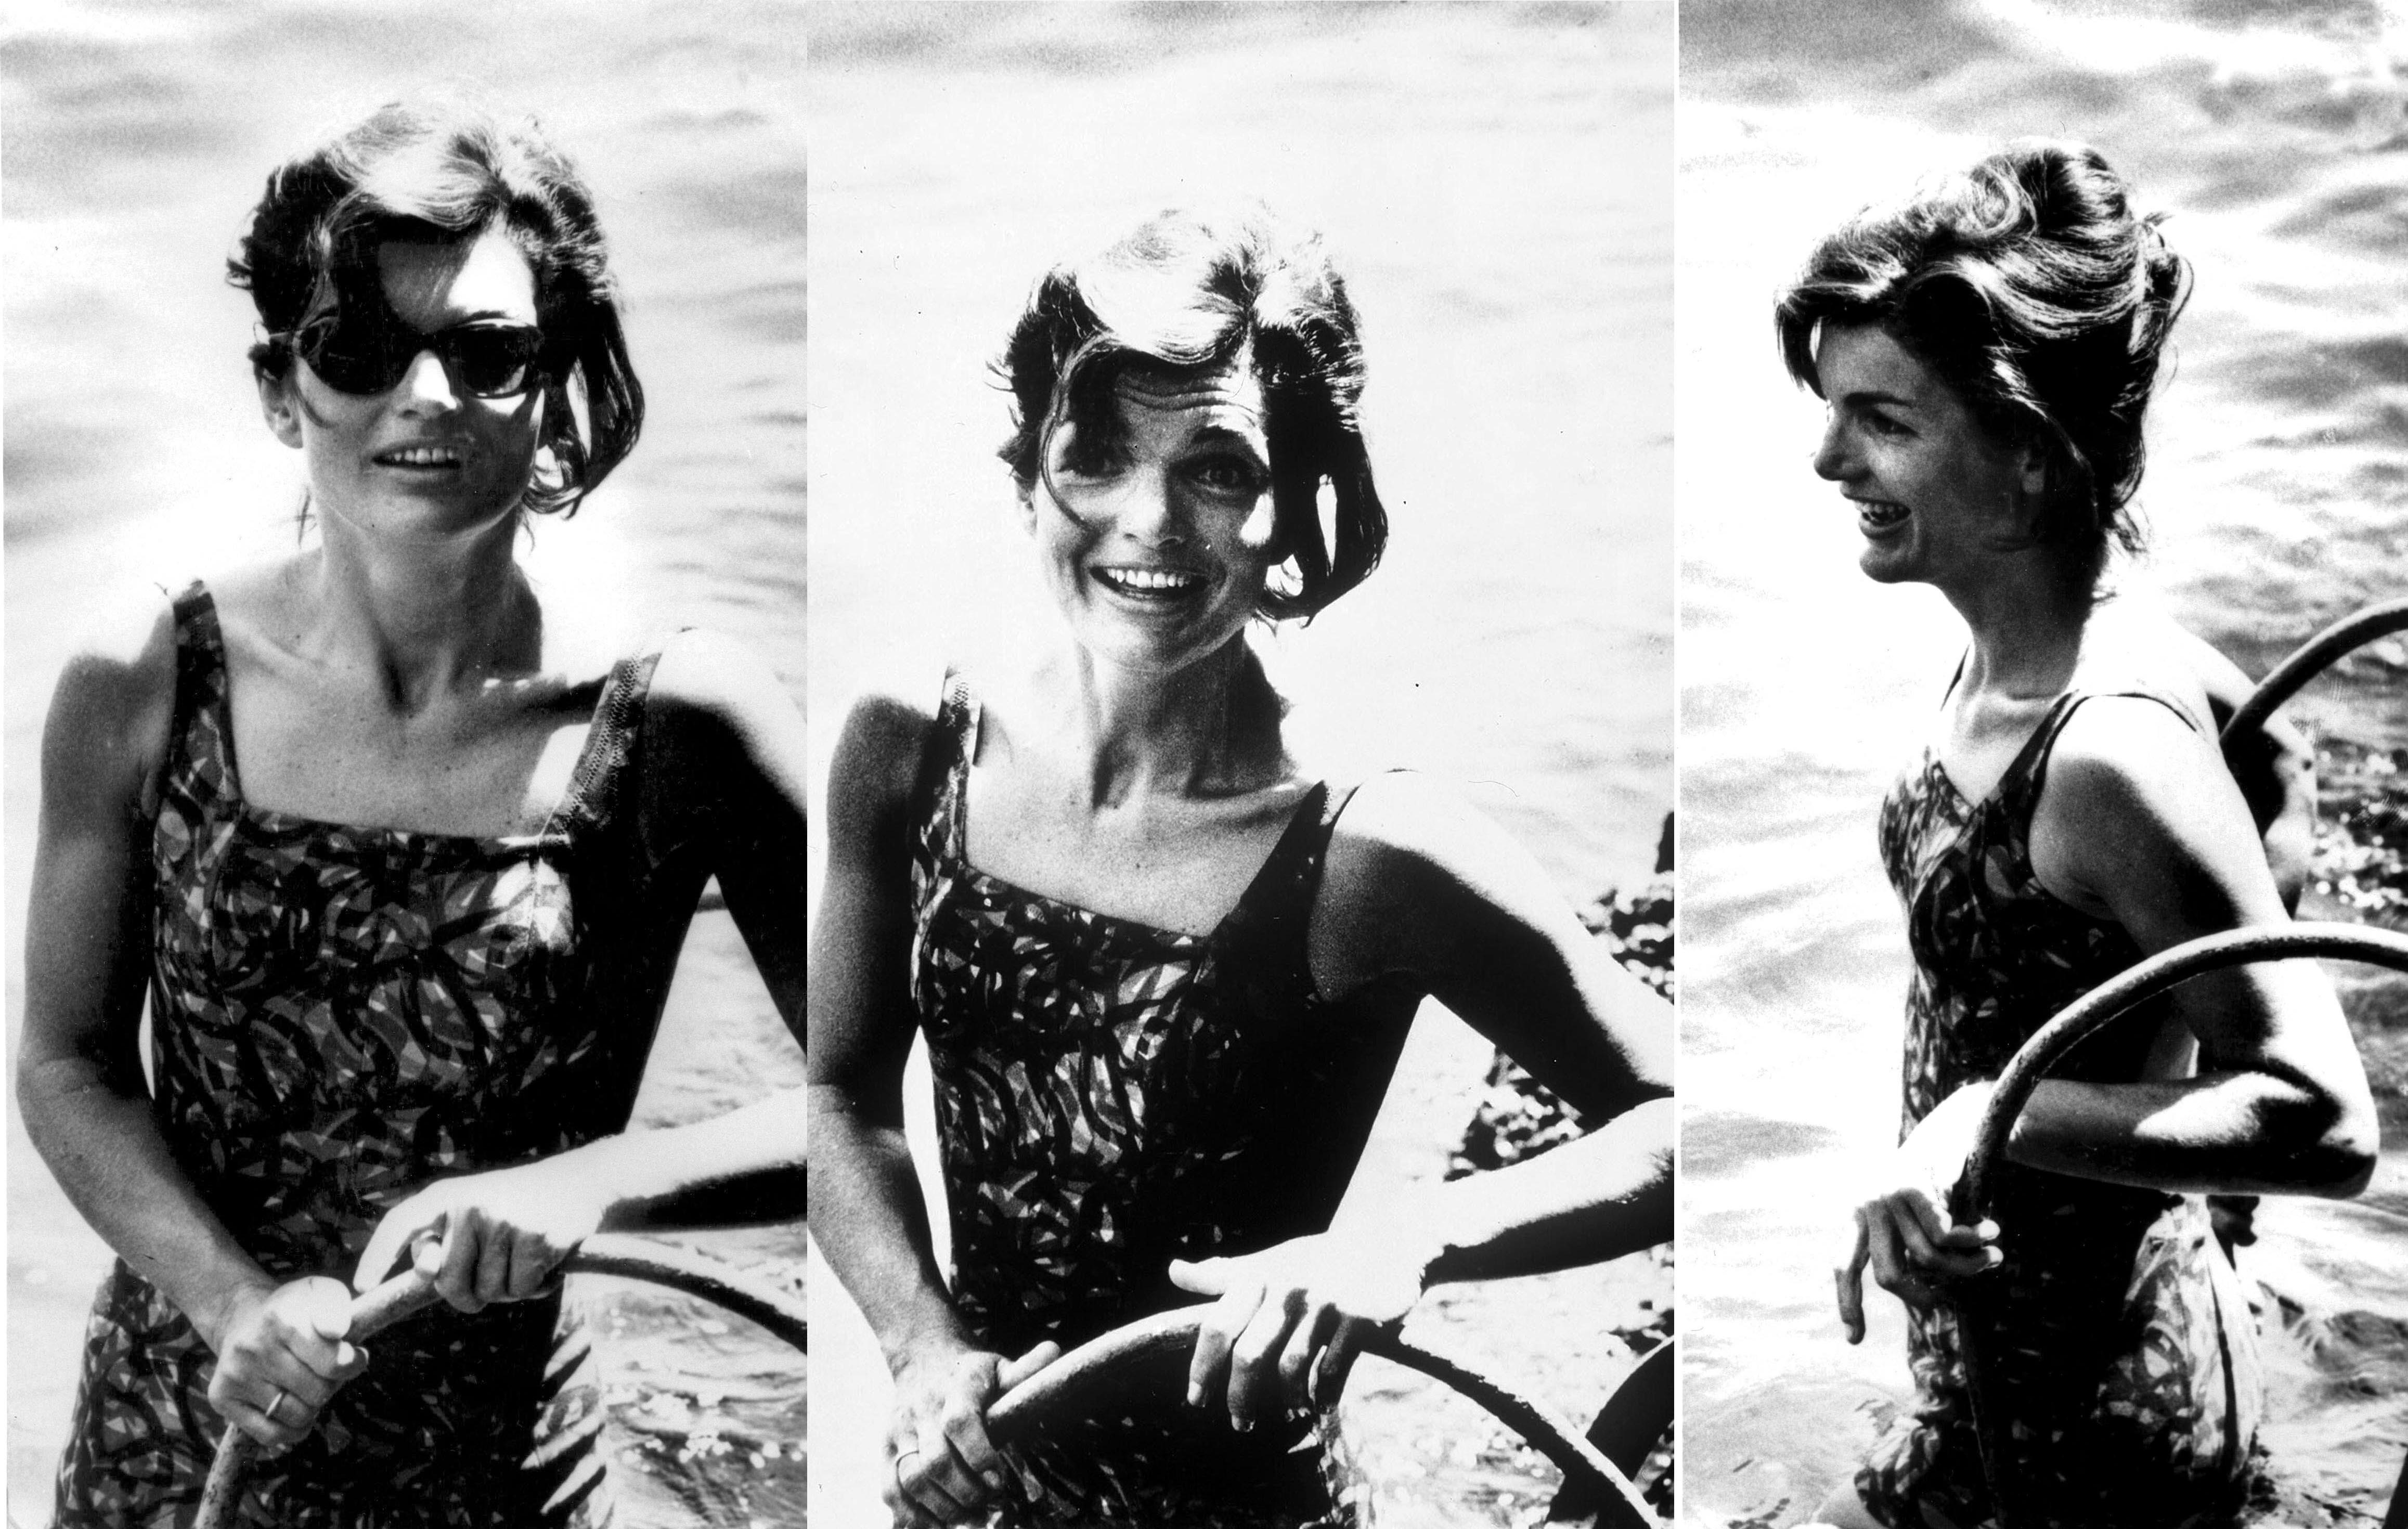 Photo by REX/Shutterstock (313664ag) JACKIE KENNEDY BY THE SWIMMING POOL IN RAVELLO, ITALY - 1962 VARIOUS